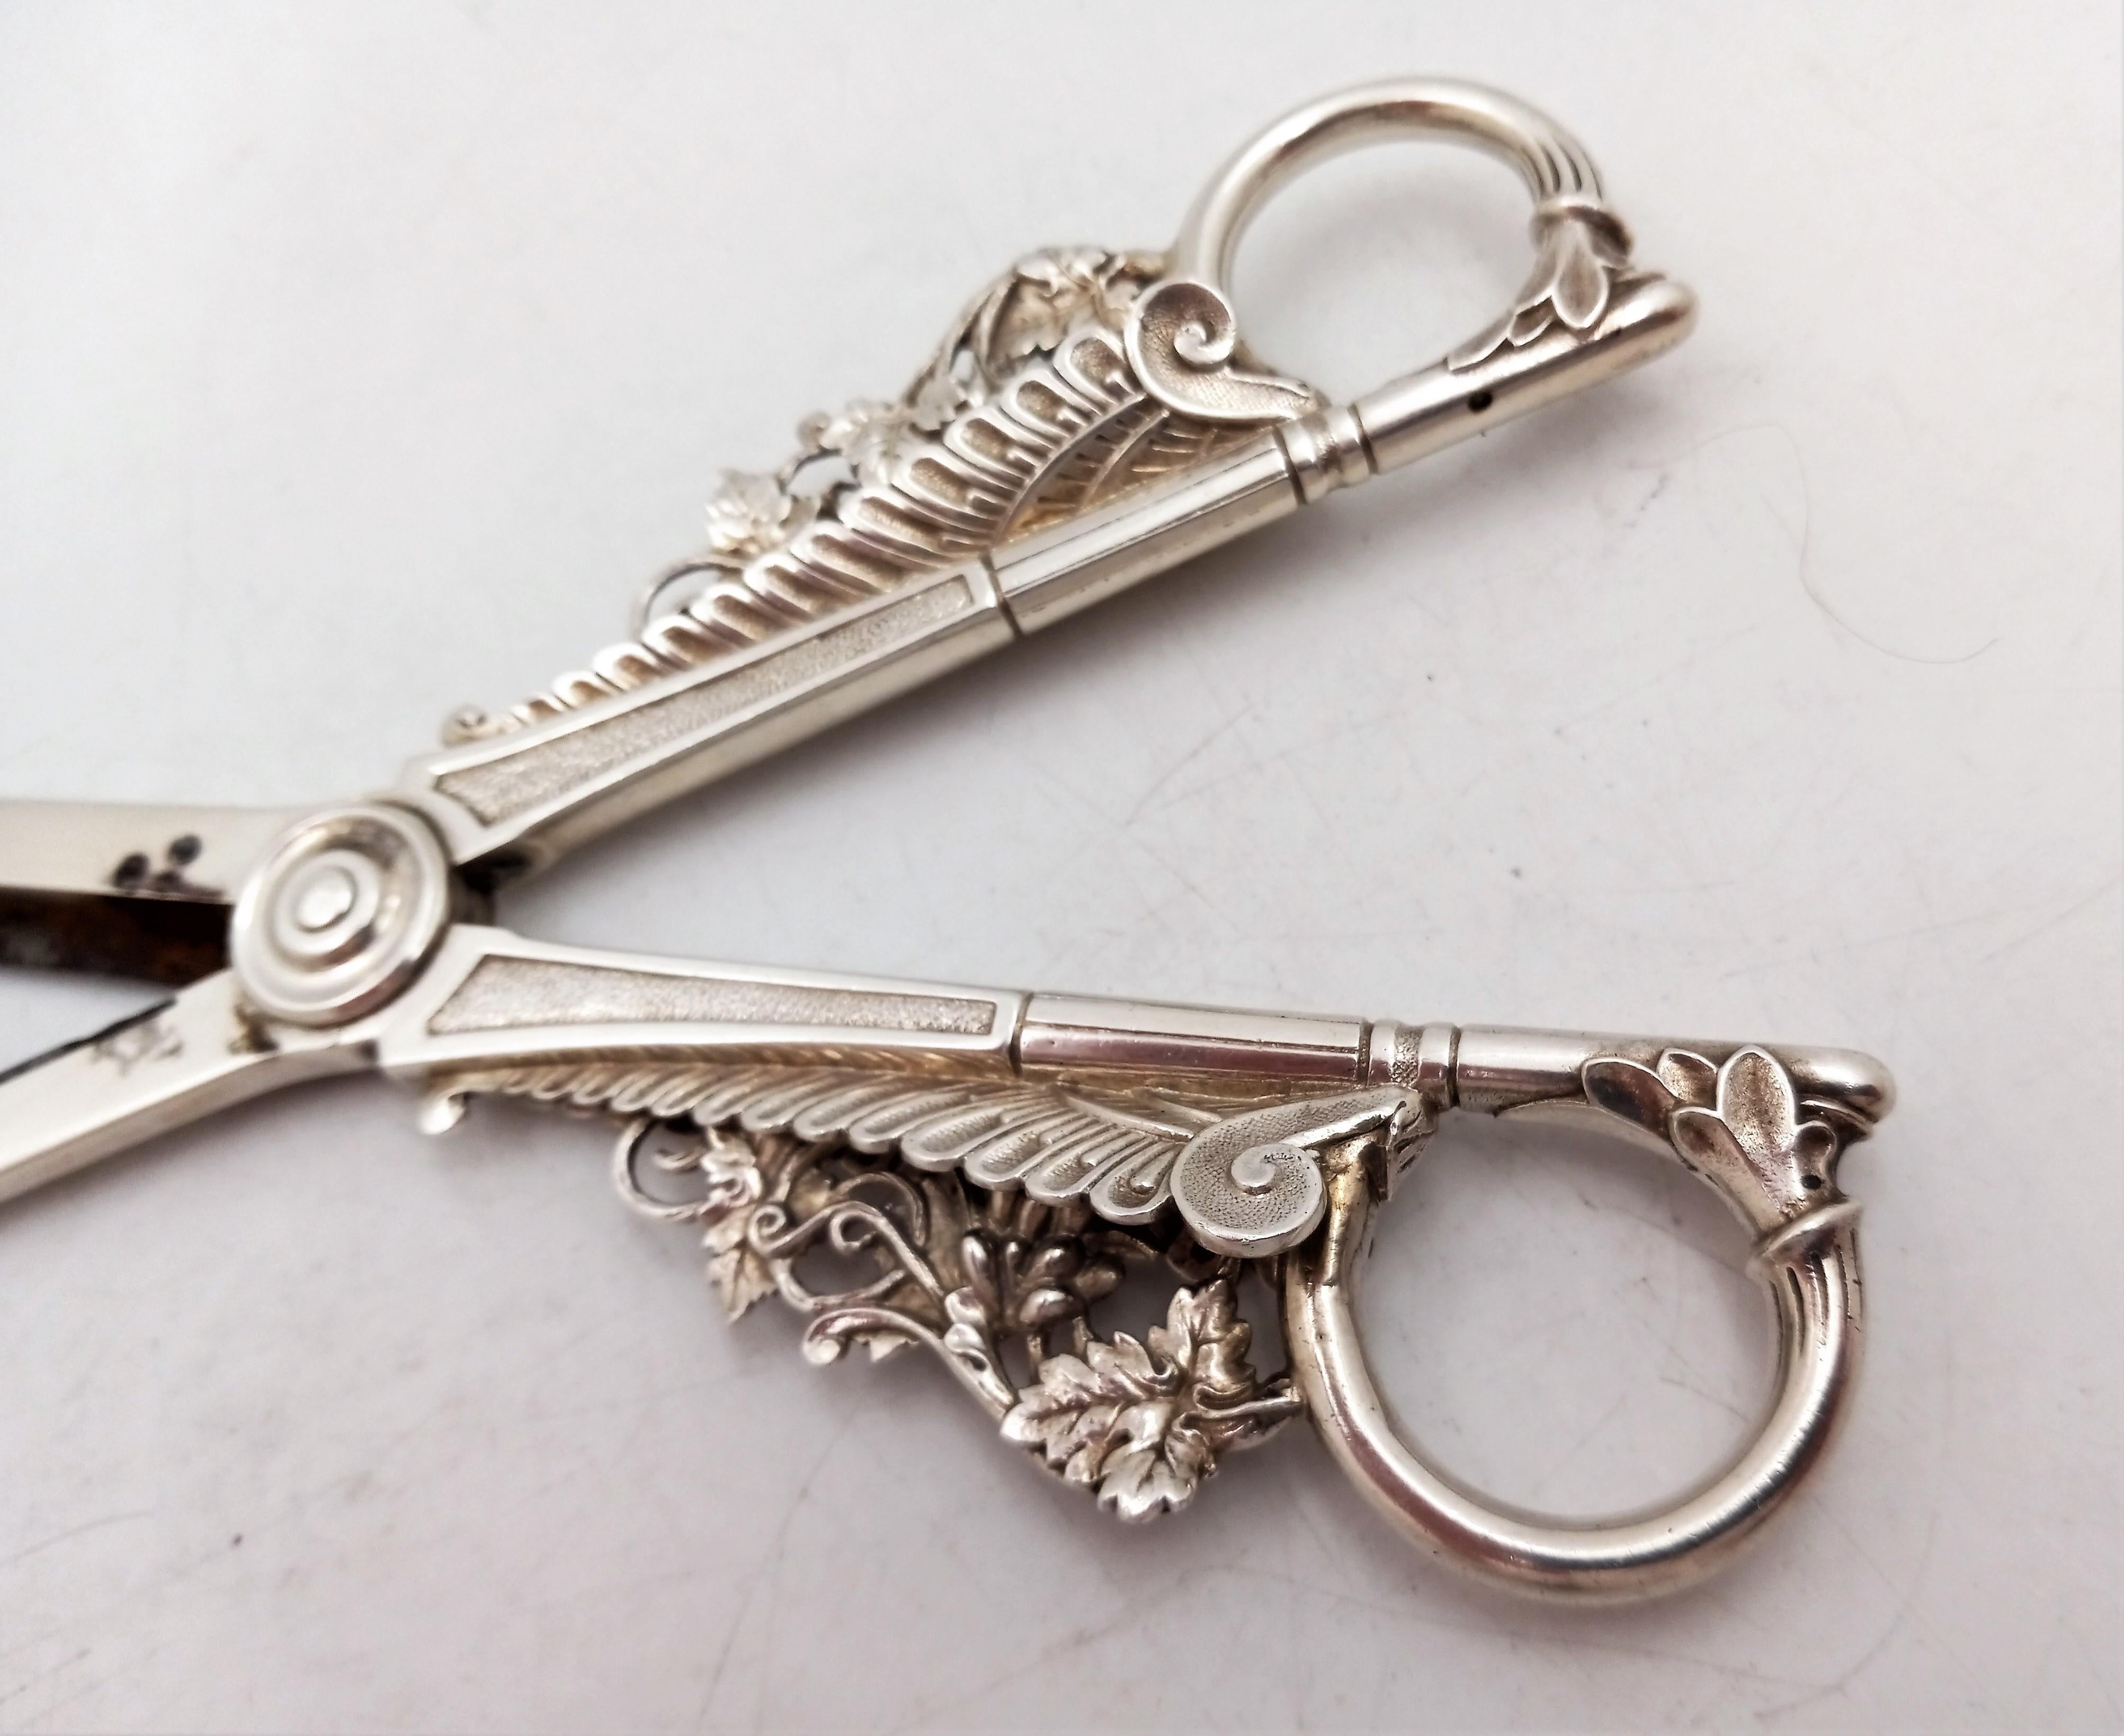 Aesthetic ornate grape shears -- sterling silver by Gorham Silversmiths, circa 1870. Steel reinforcement blades are attached to the sterling blades. Measures: length: 6 1/2